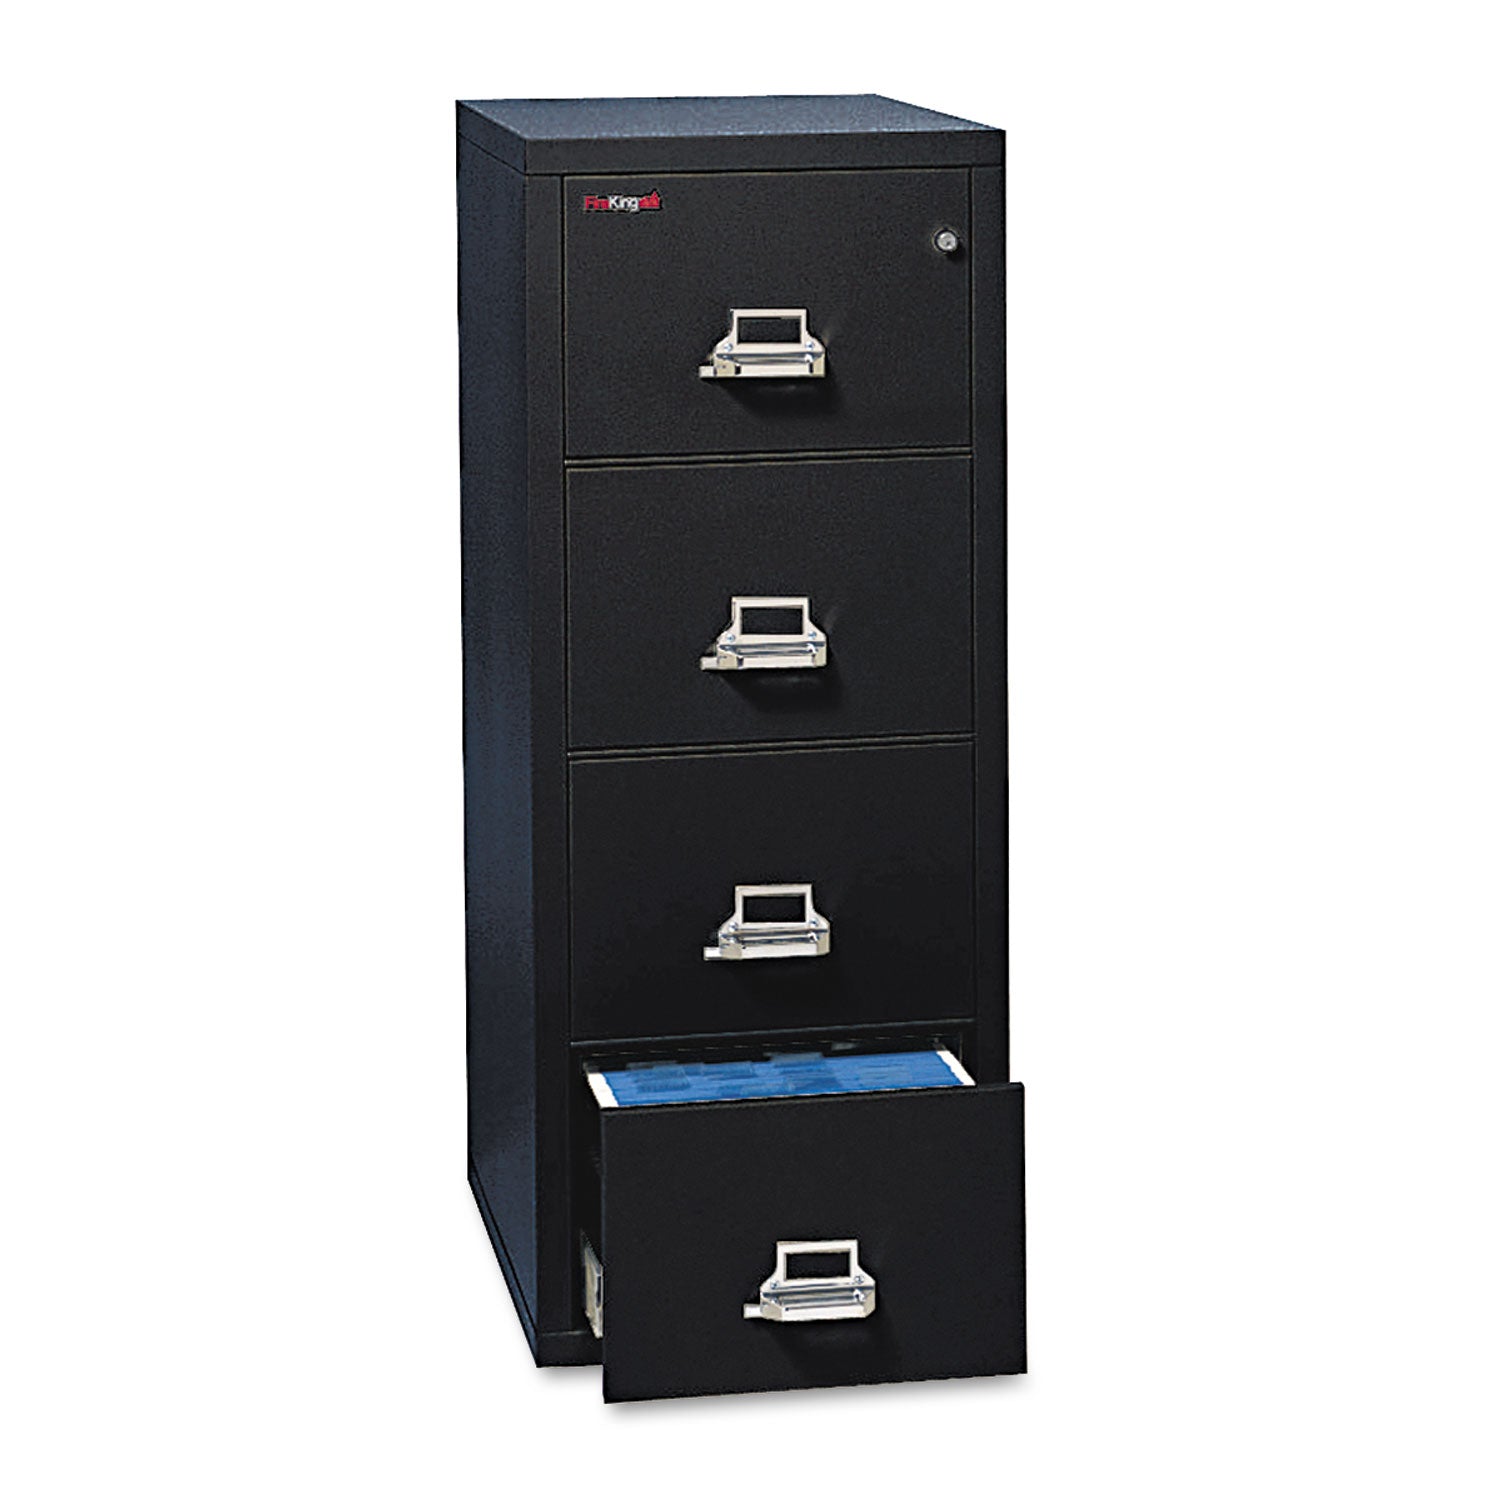 Insulated Vertical File, 1-Hour Fire Protection, 4 Letter-Size File Drawers, Black, 17.75" x 25" x 52.75 - 